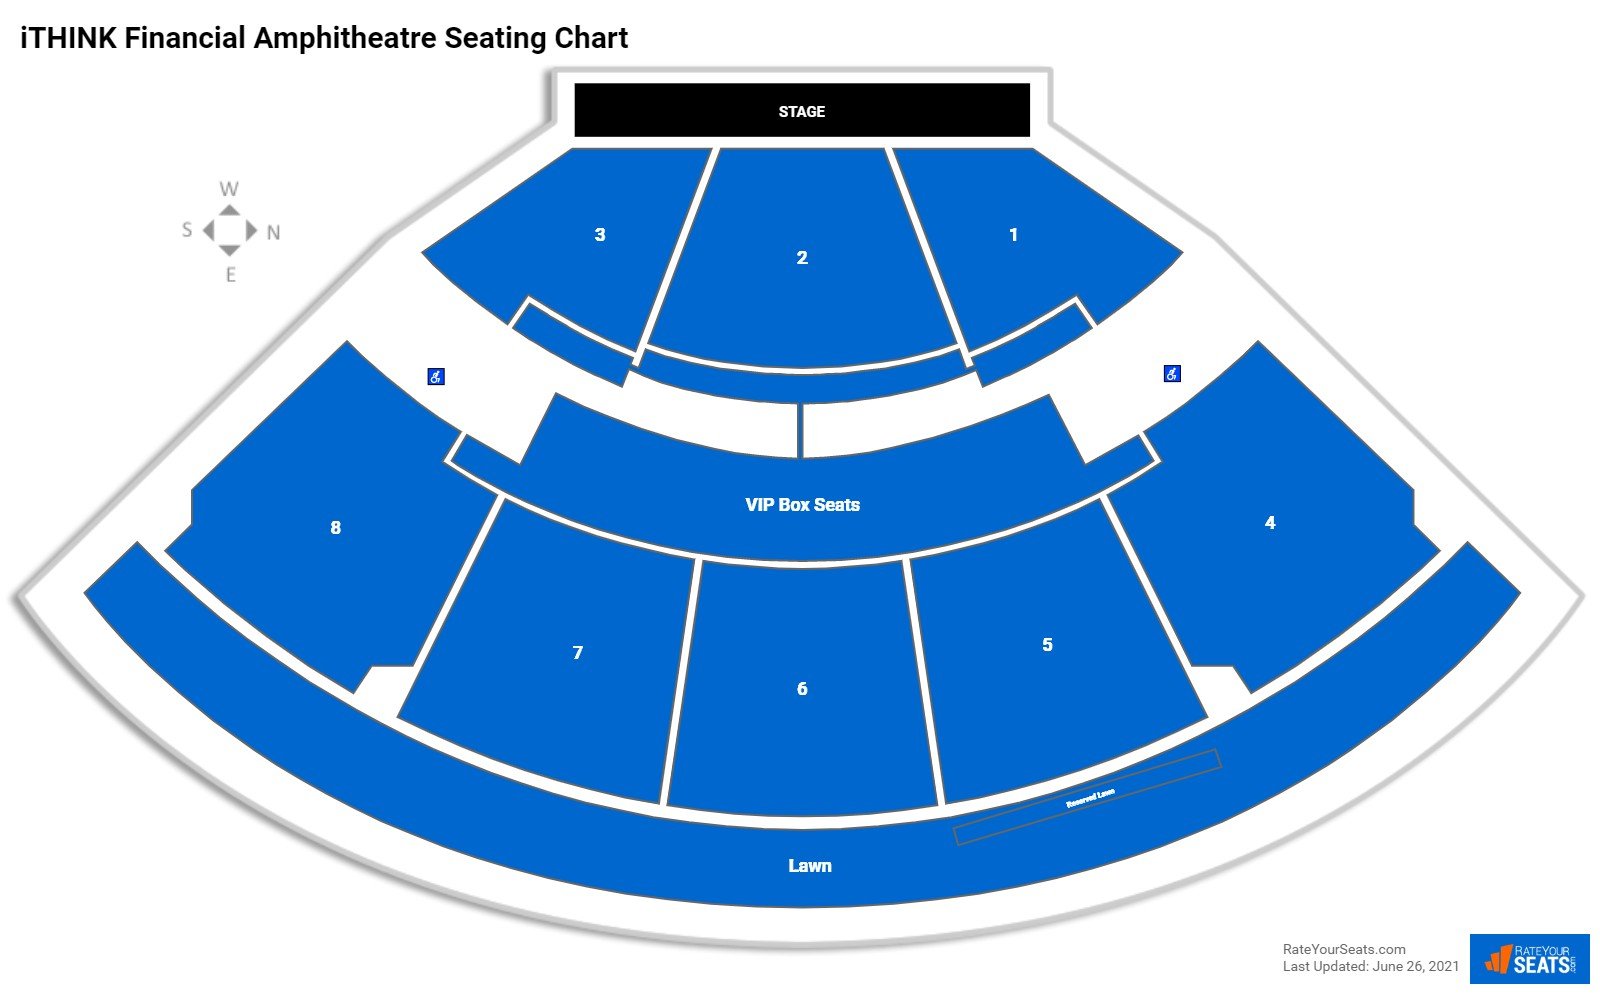 iTHINK Financial Amphitheatre Concert Seating Chart